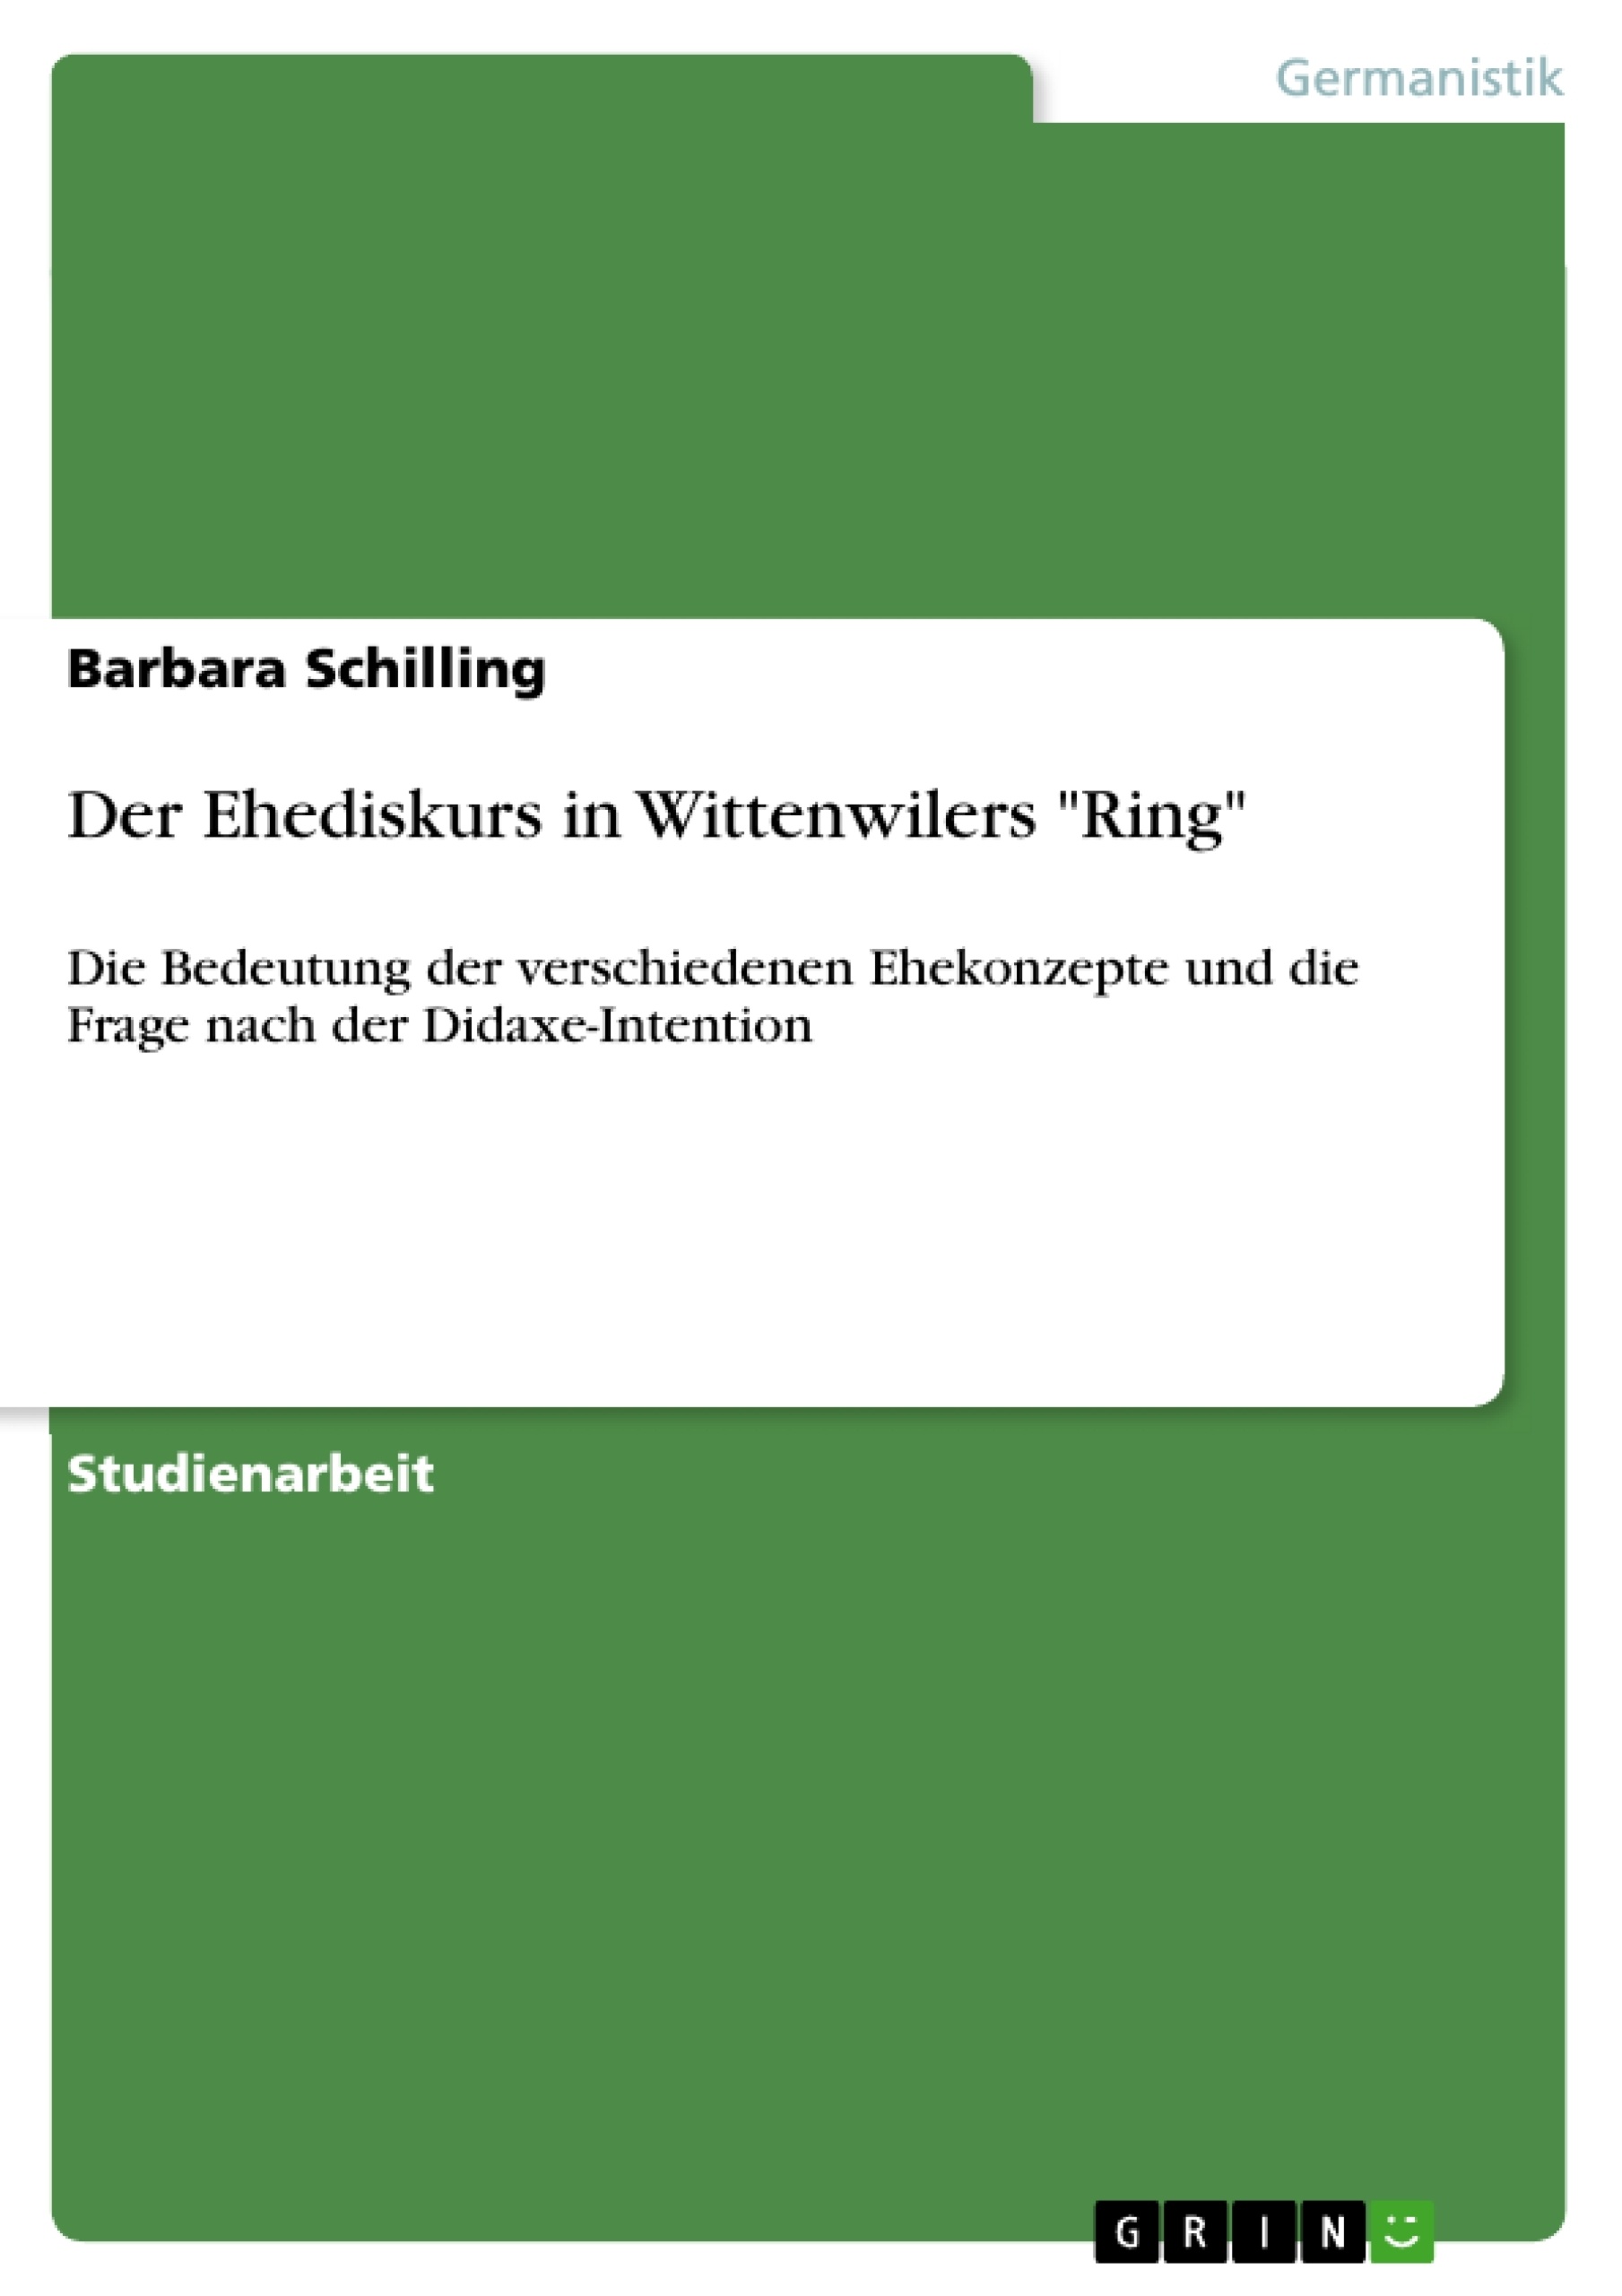 Titre: Der Ehediskurs in Wittenwilers "Ring"